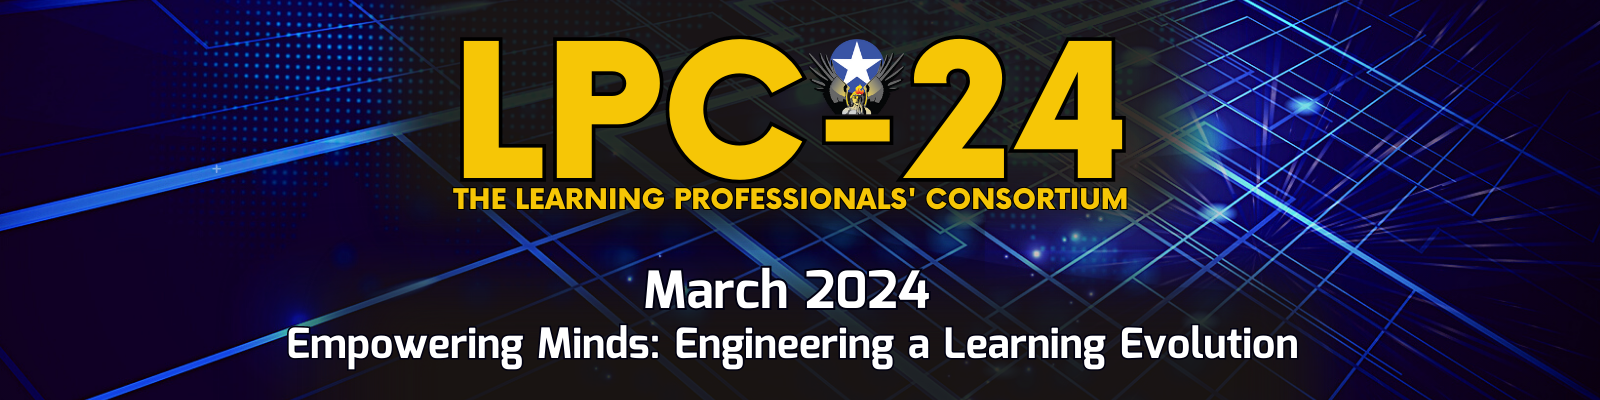 March 2024 LPC-24 The Learning Professionals' Consortium Empowering Minds: Engineering a Learning Evolution